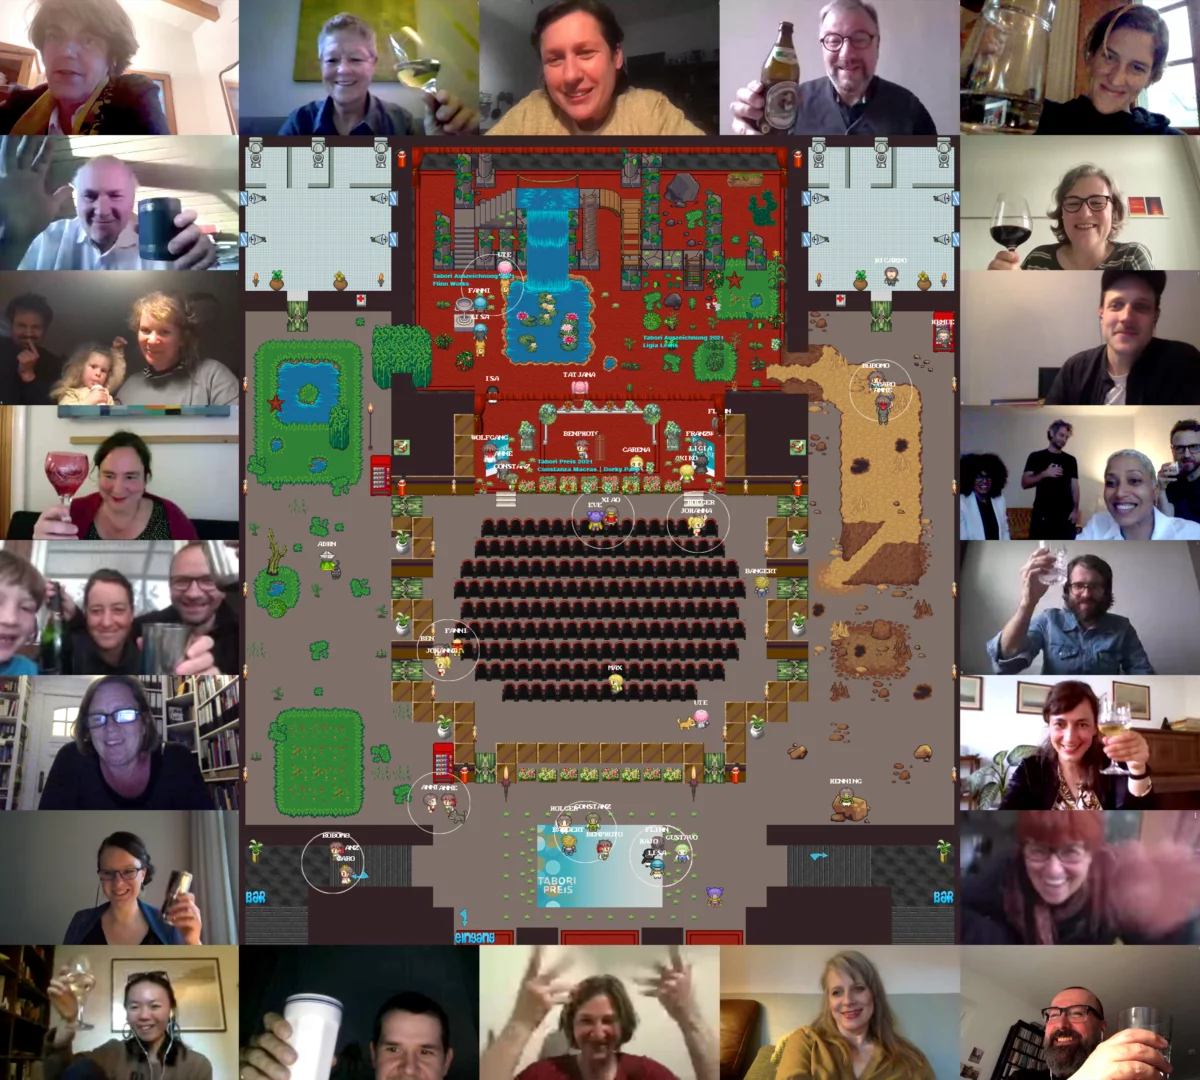 Around the graphics of the virtual event space of the after-show party, zoom tiles show the faces of various guests.